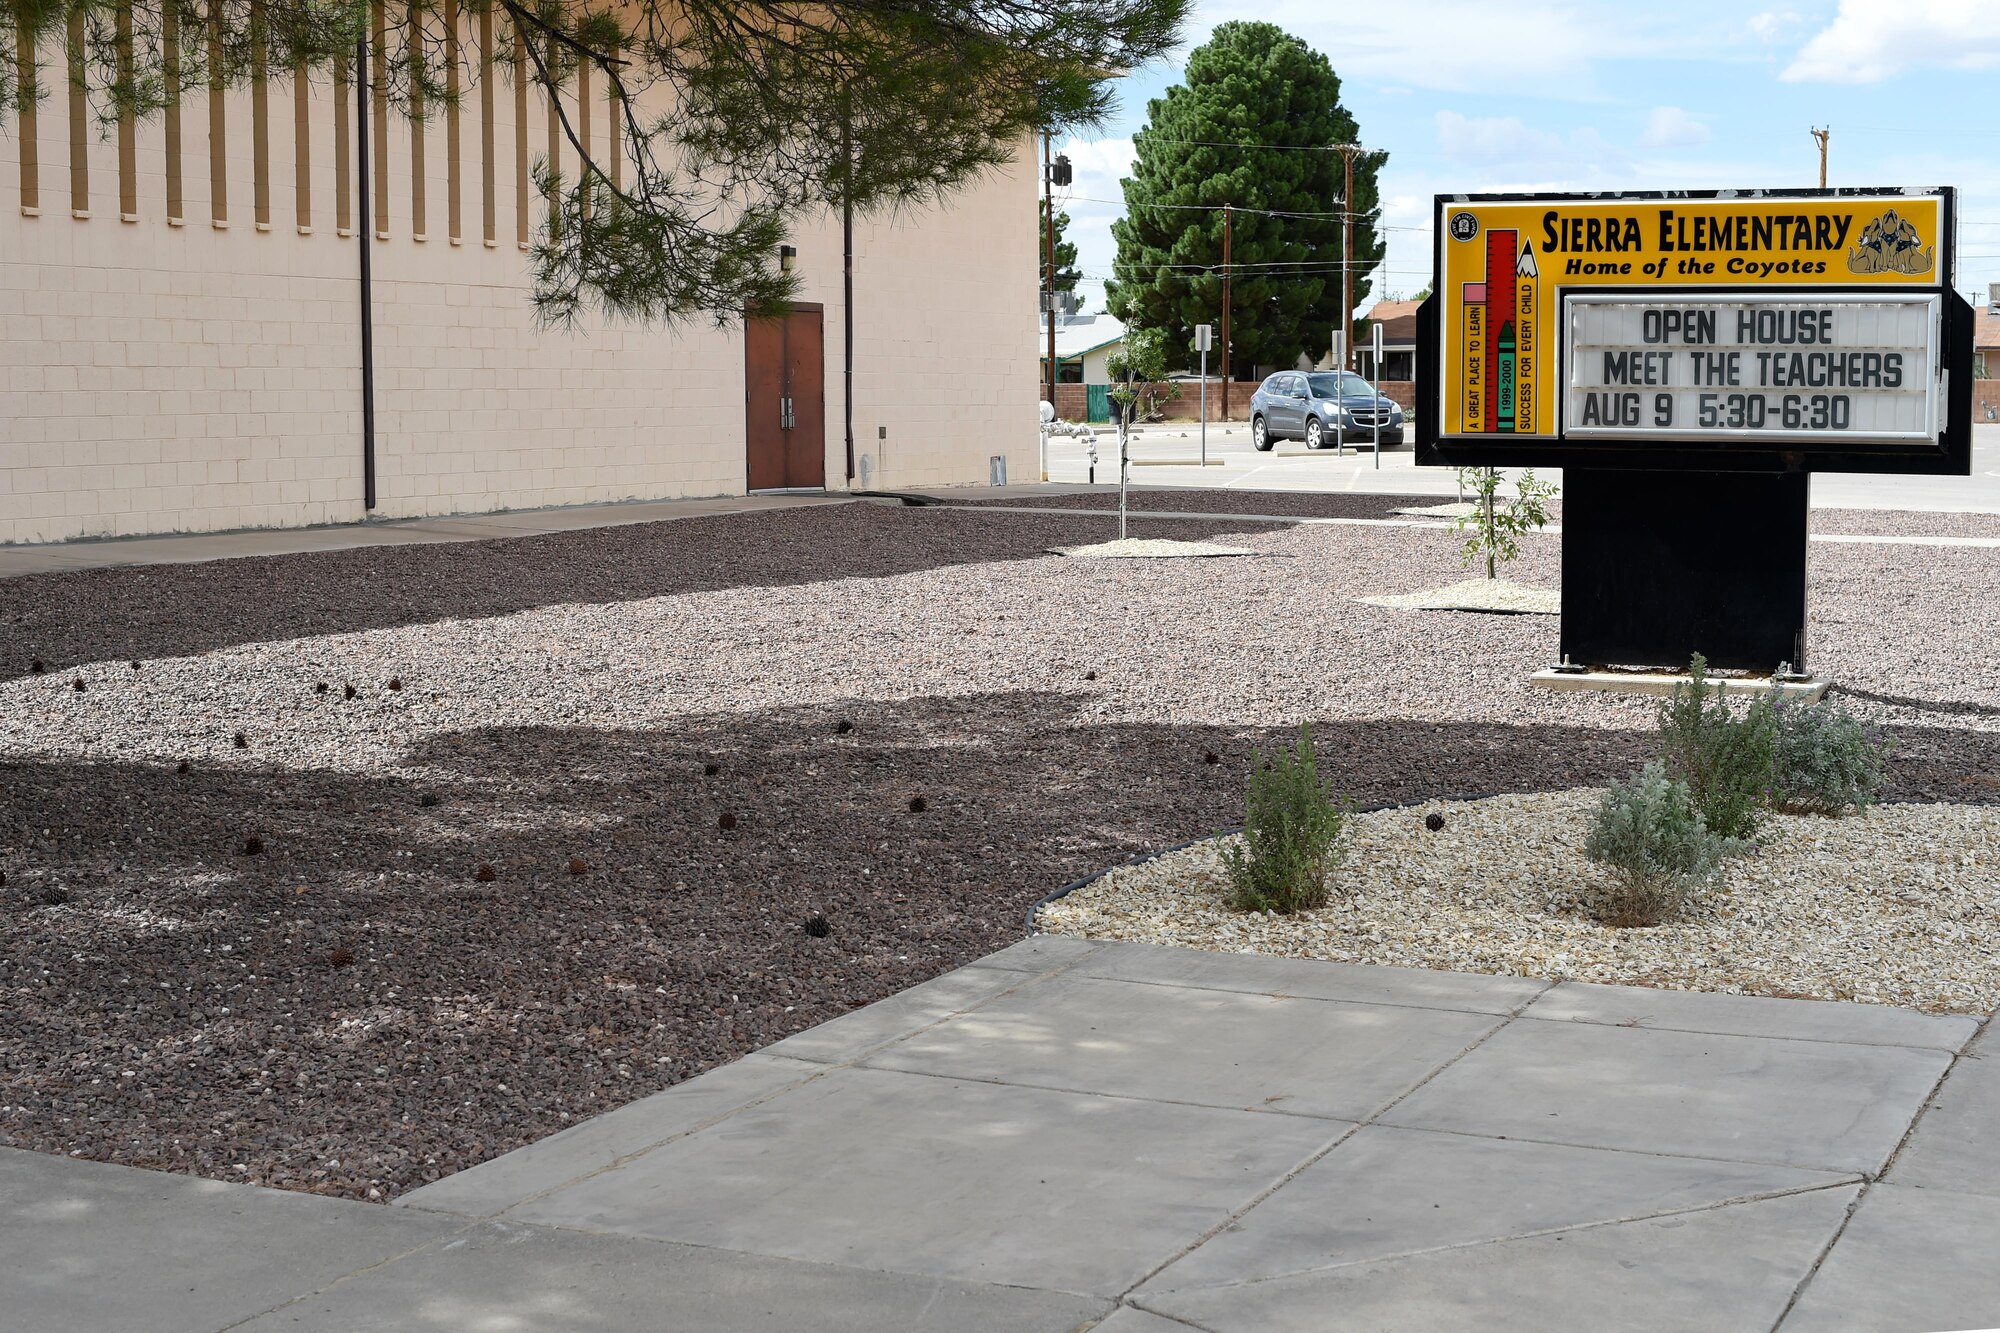 The entrance to Sierra Elementary School in Alamogordo, N.M., underwent renovations by Big Give volunteers in July. The area was damaged due to flooding within the recent years. (U.S. Air Force photo by Staff Sgt. Eboni Prince)